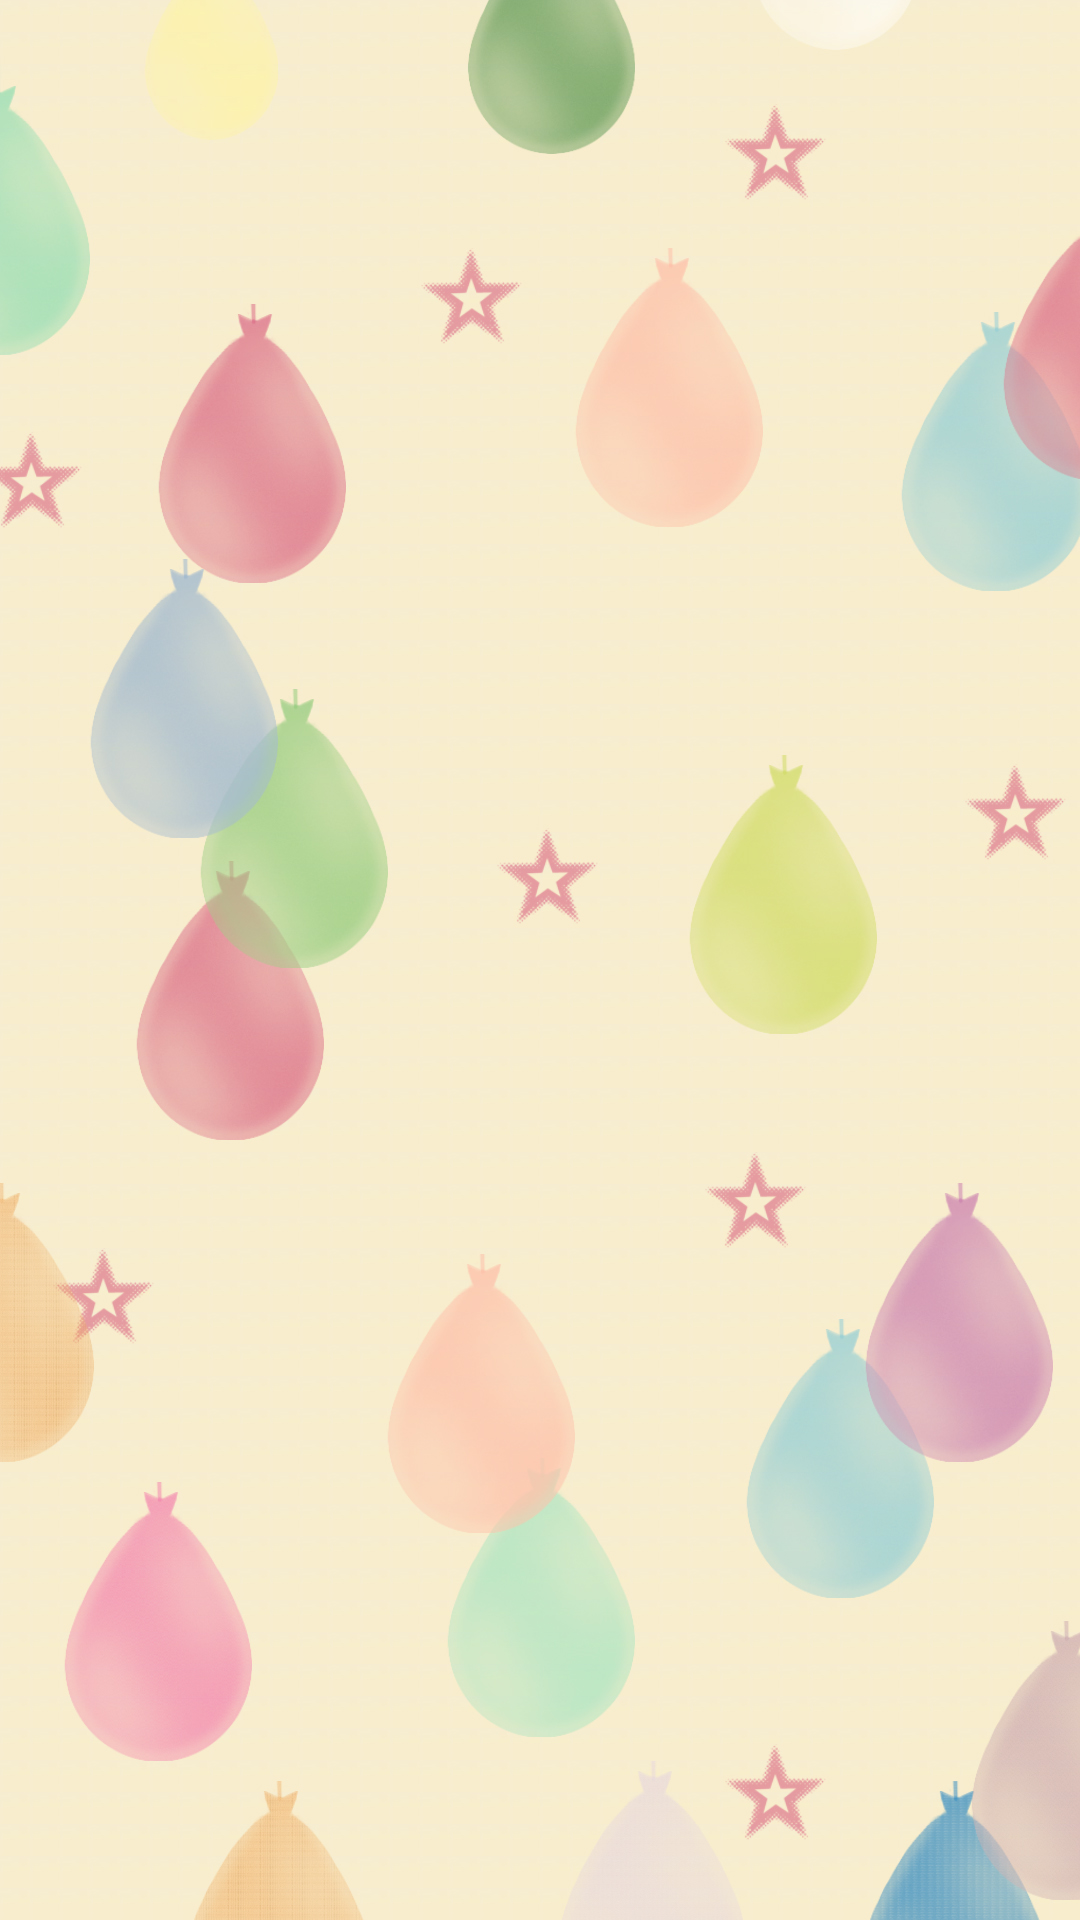 Colorful Balloon Pattern Iphone Wallpapers Iphone Wallpapers